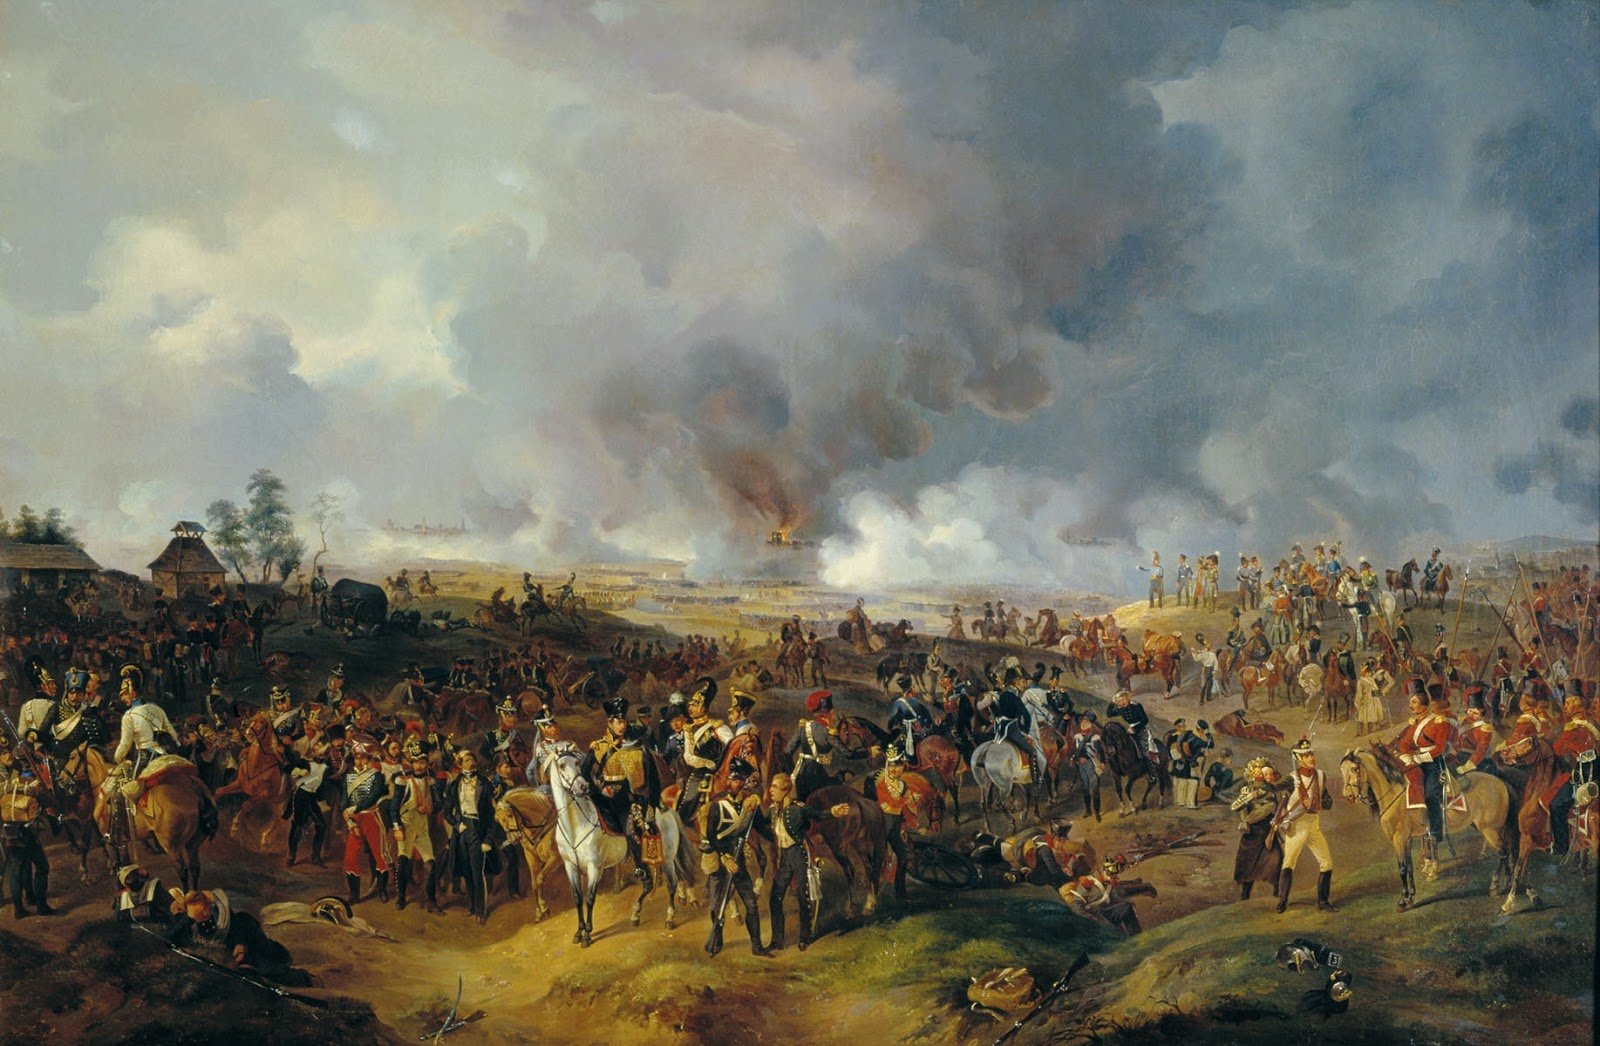 1813: Leipzig: The Greatest Battle in Europe before the 20th Century